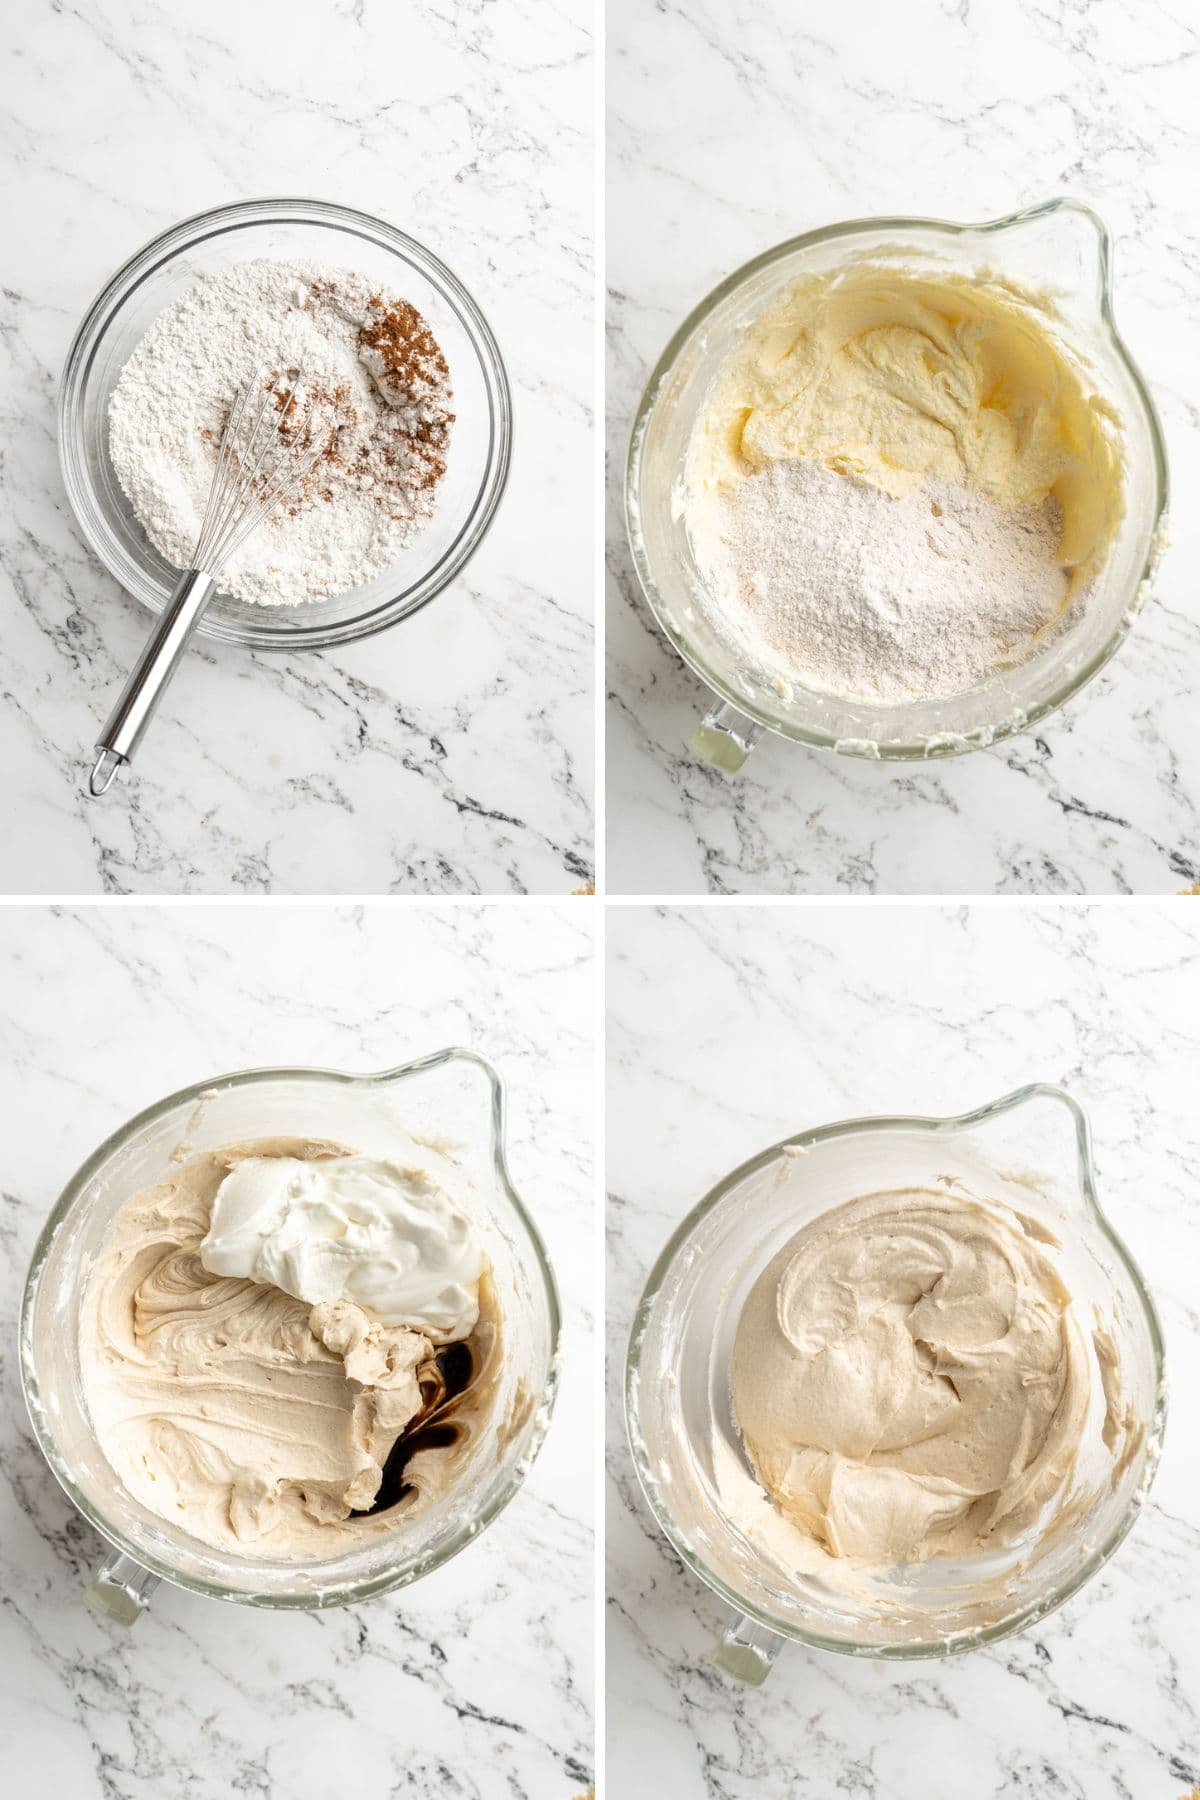 A collage of images from mixing the dry ingredients, adding them to the butter and sugar, adding the sour cream, and then when mixed together.